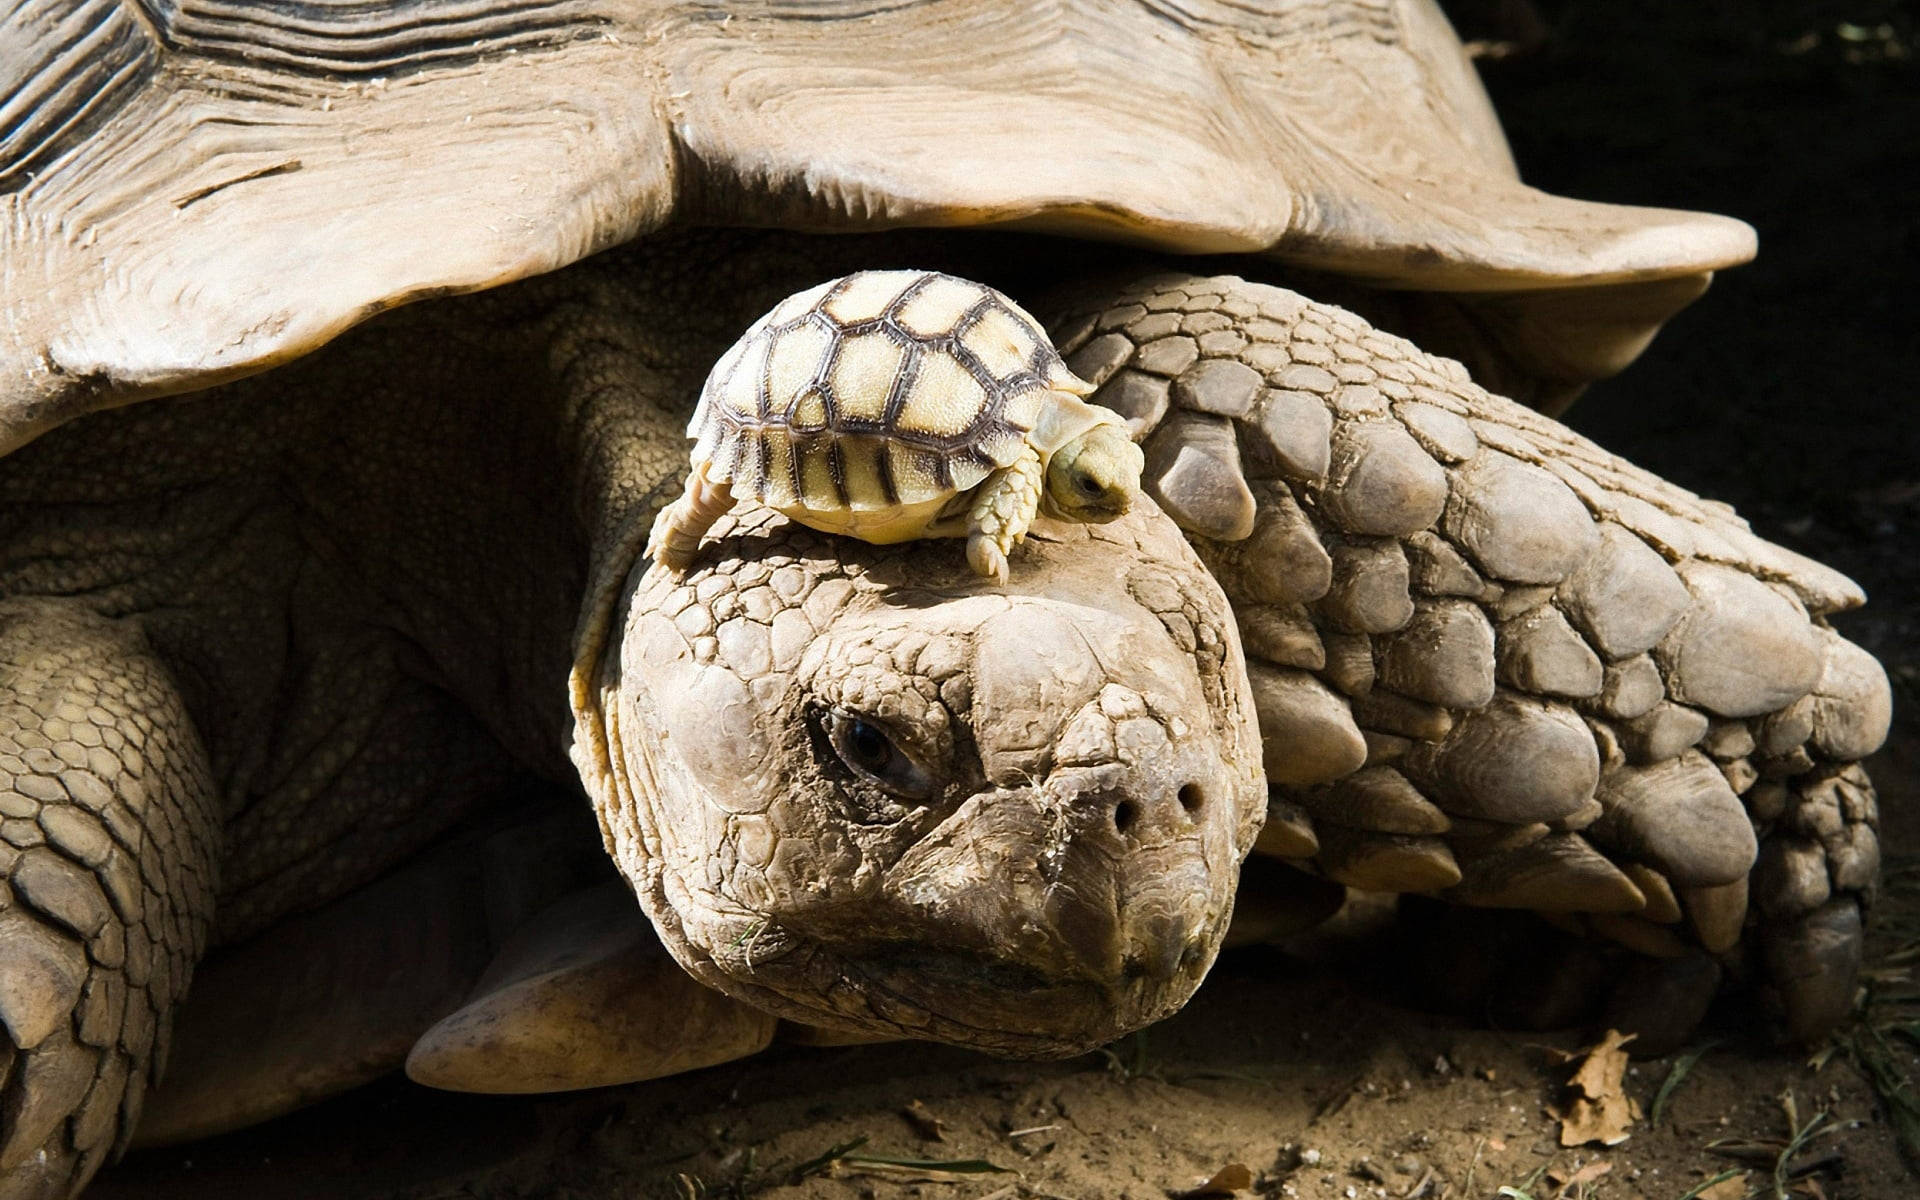 A Baby Tortoise Catching a Ride on its Mother's Back. Wallpaper